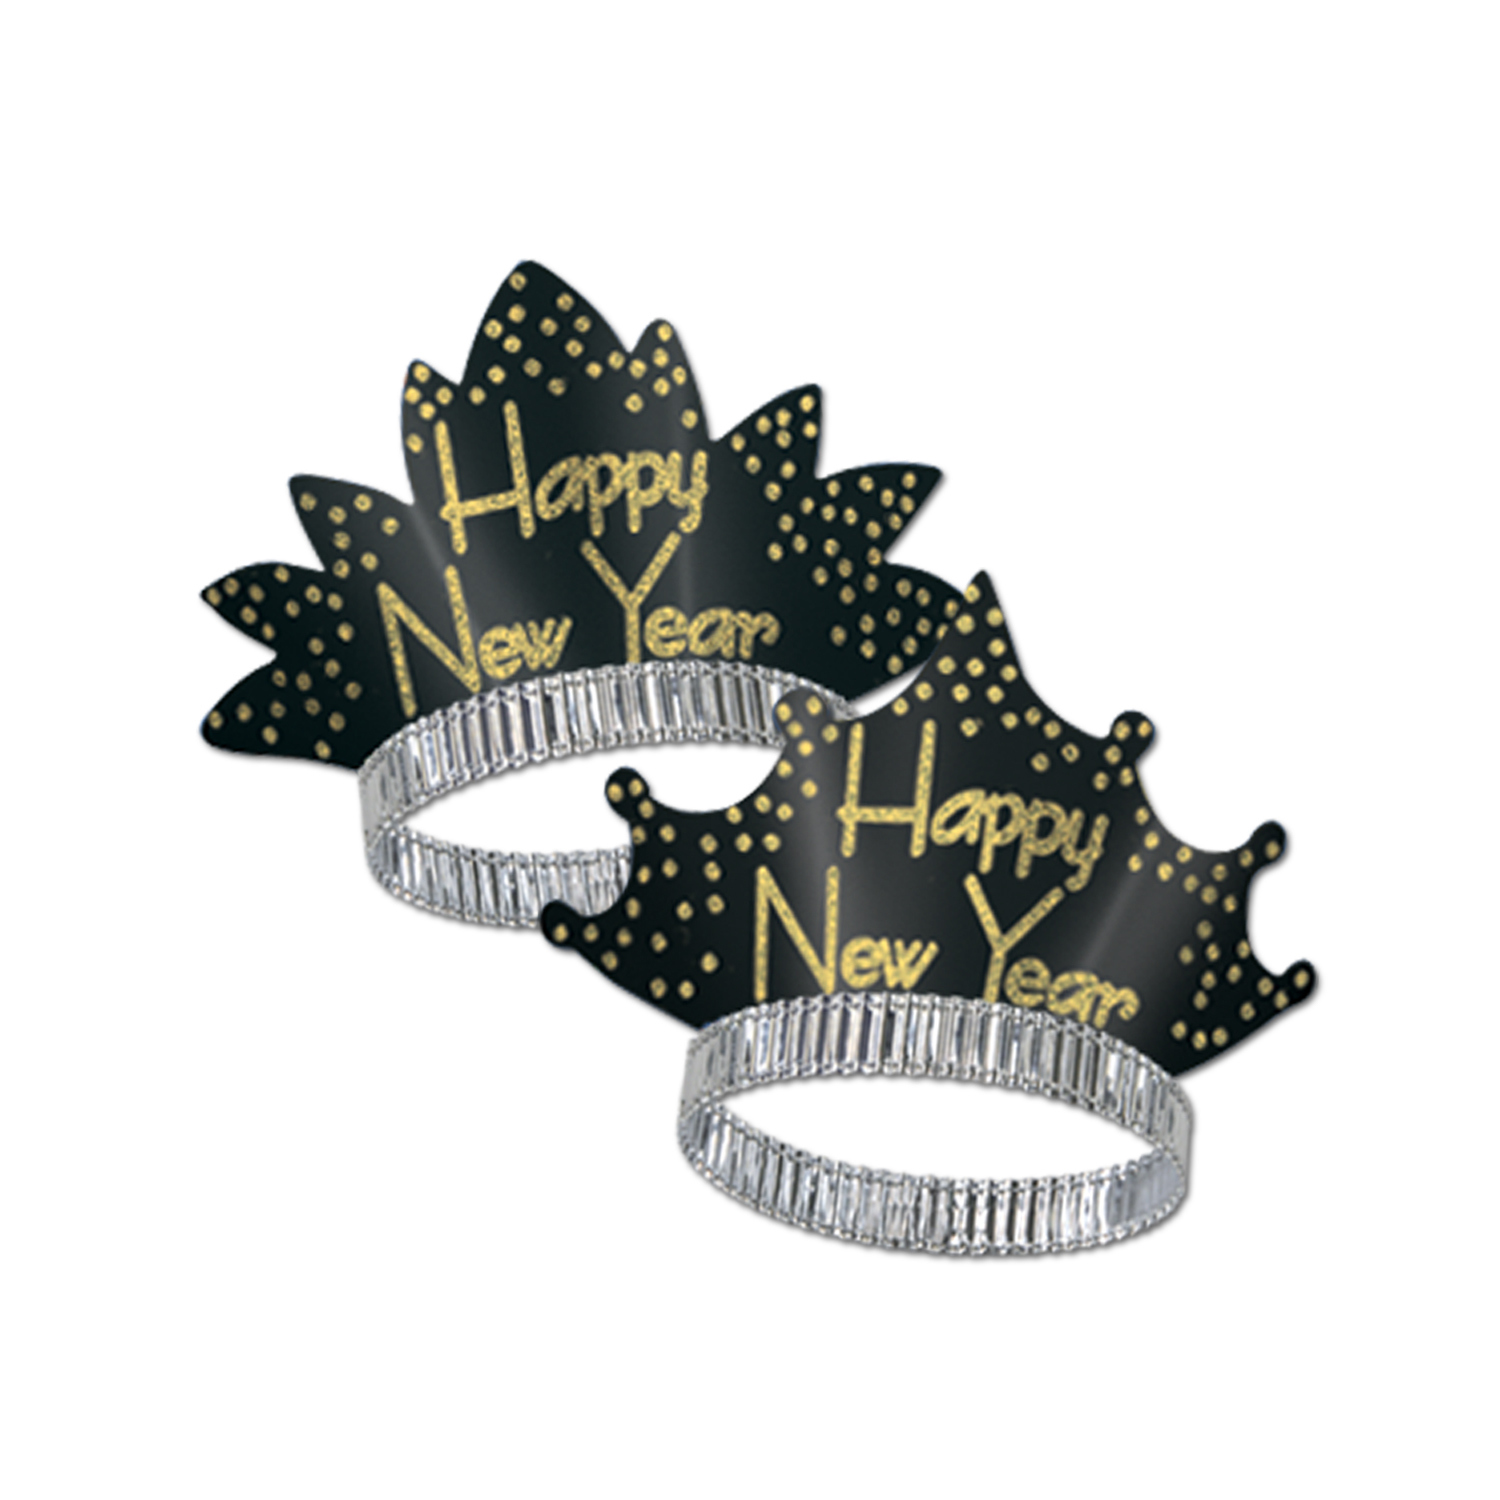 Black back ground tiara with gold confetti accents around the edges and the words "Happy New Year".